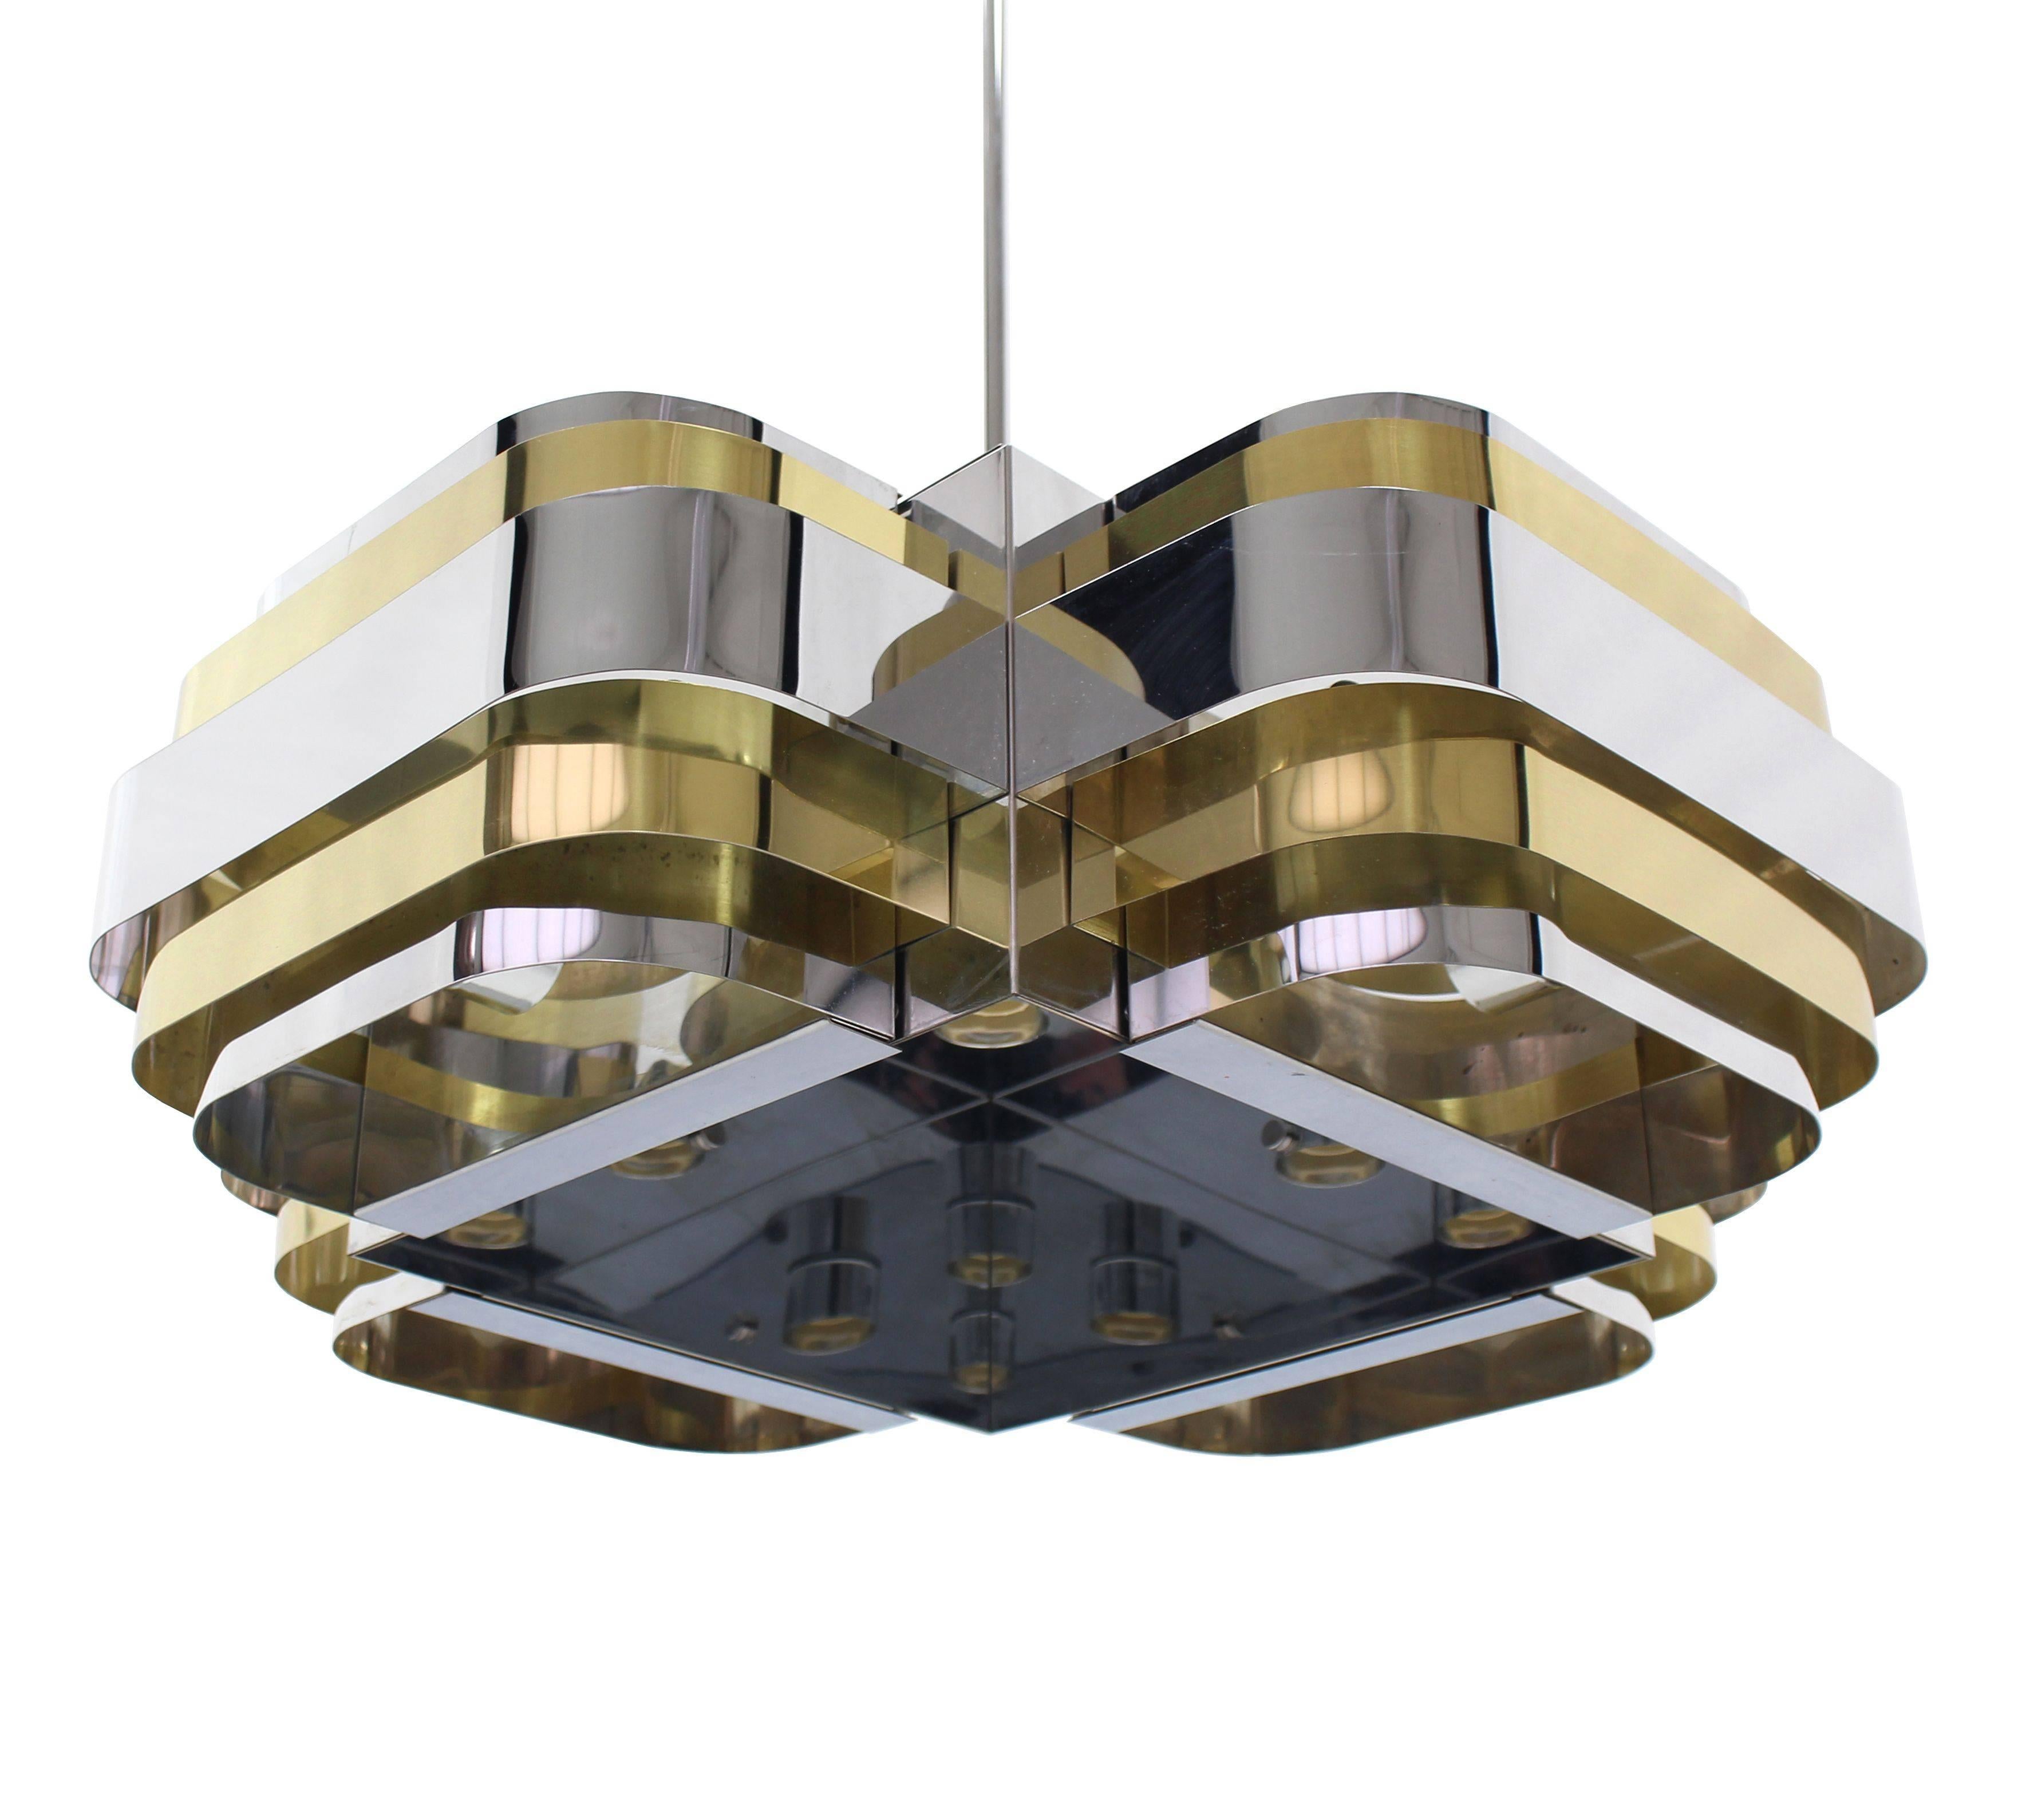 Brass and Chrome Light Fixture In Excellent Condition For Sale In Rockaway, NJ